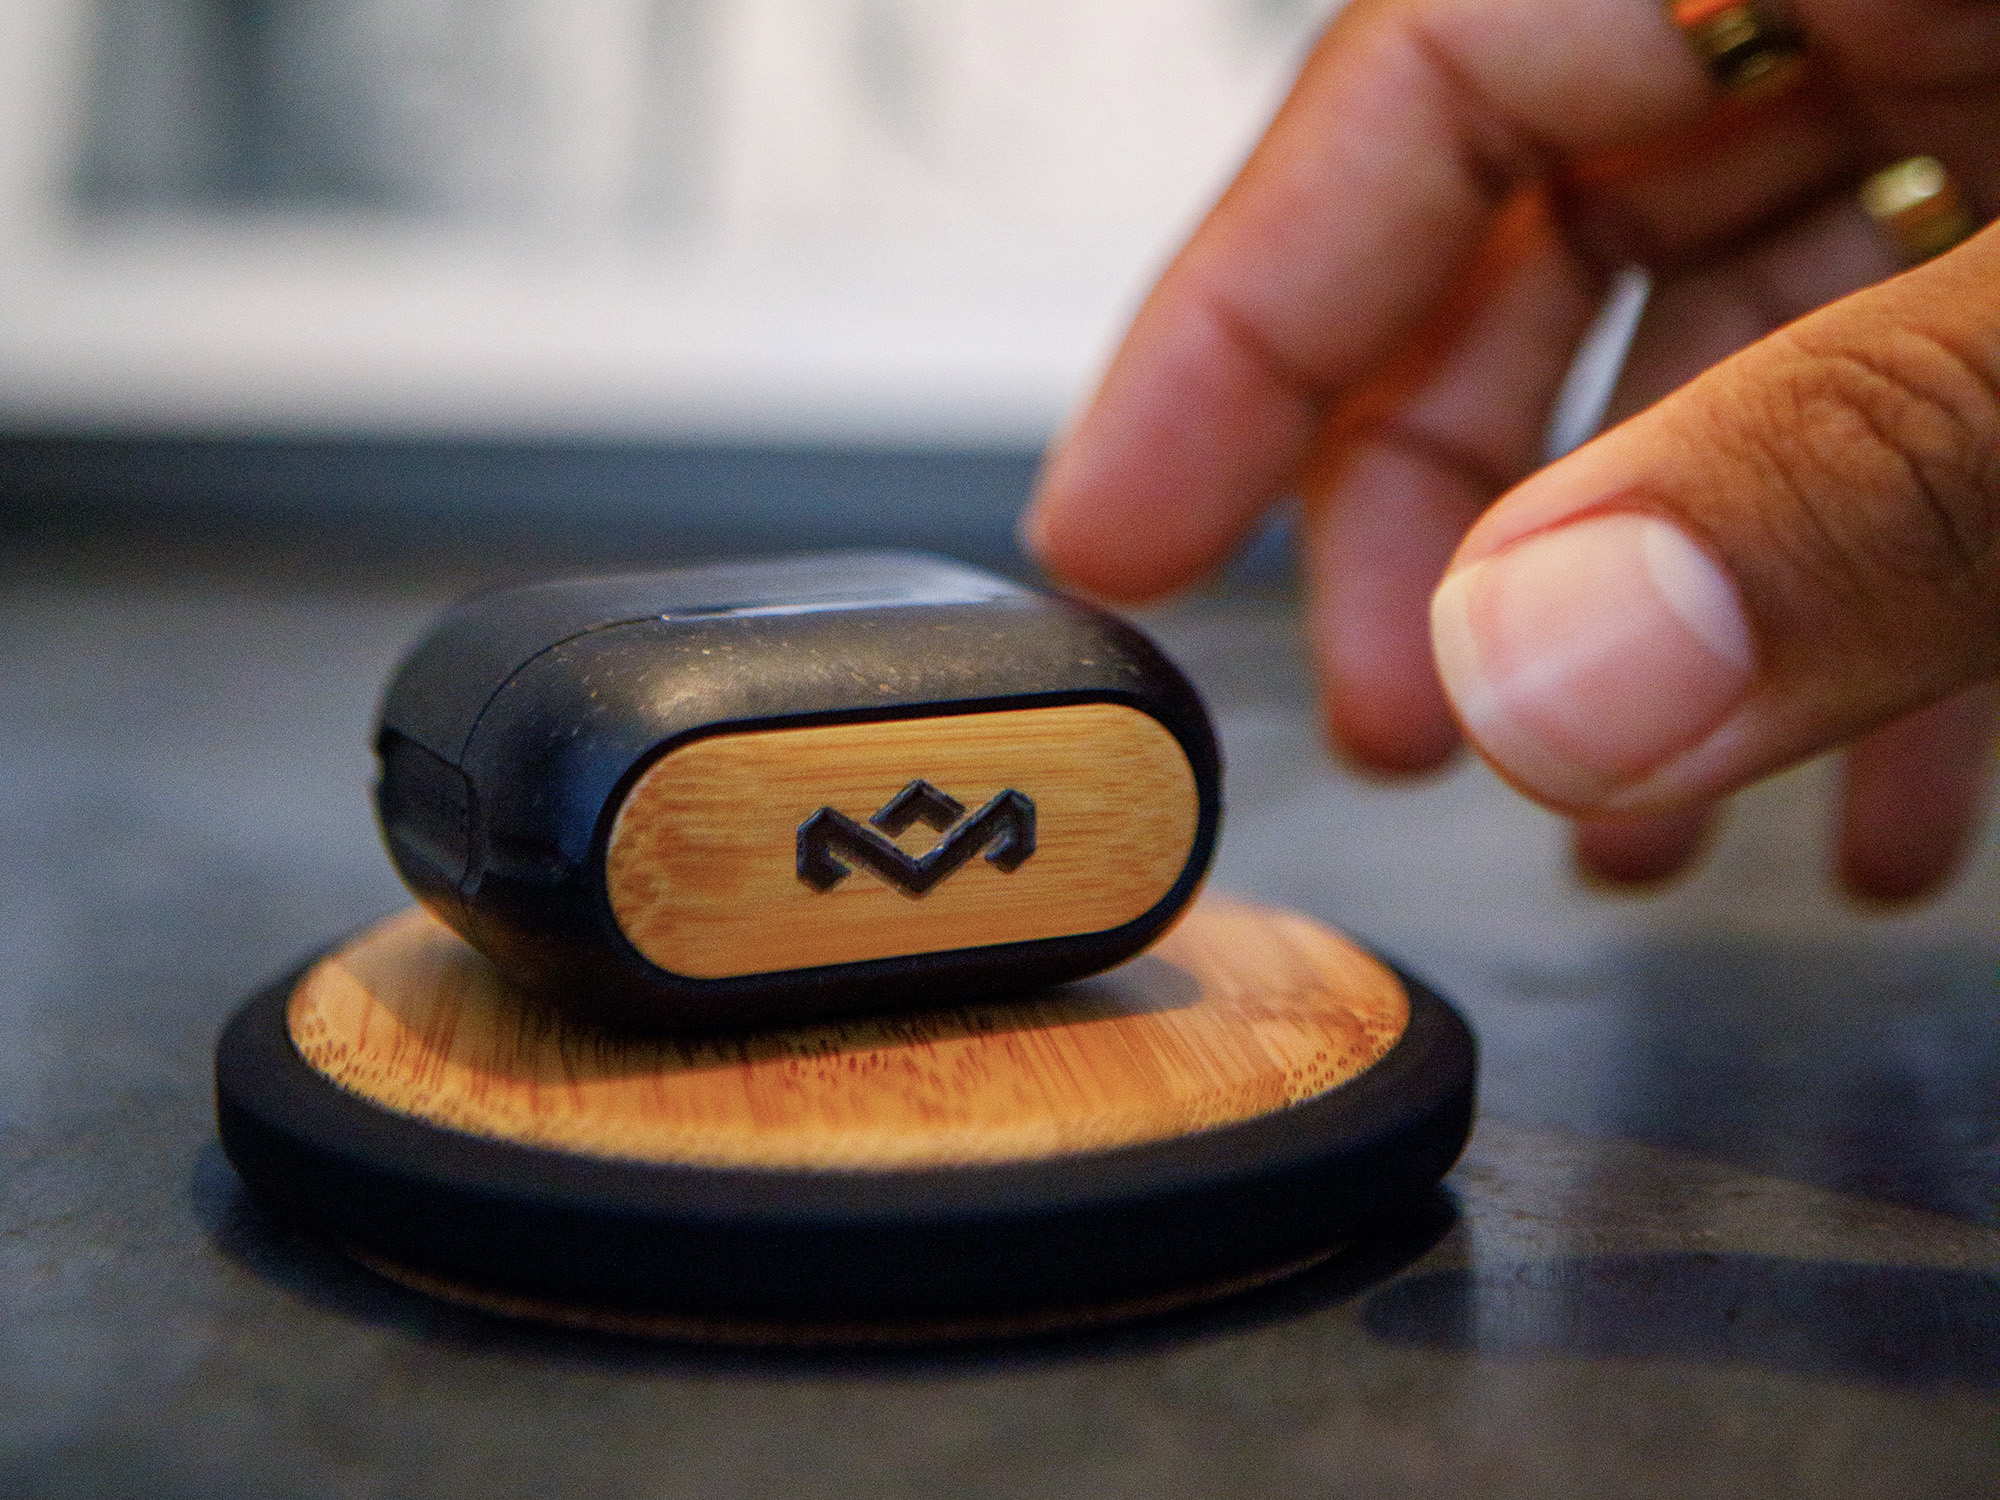 House of Marley Redemption ANC true wireless earbuds review